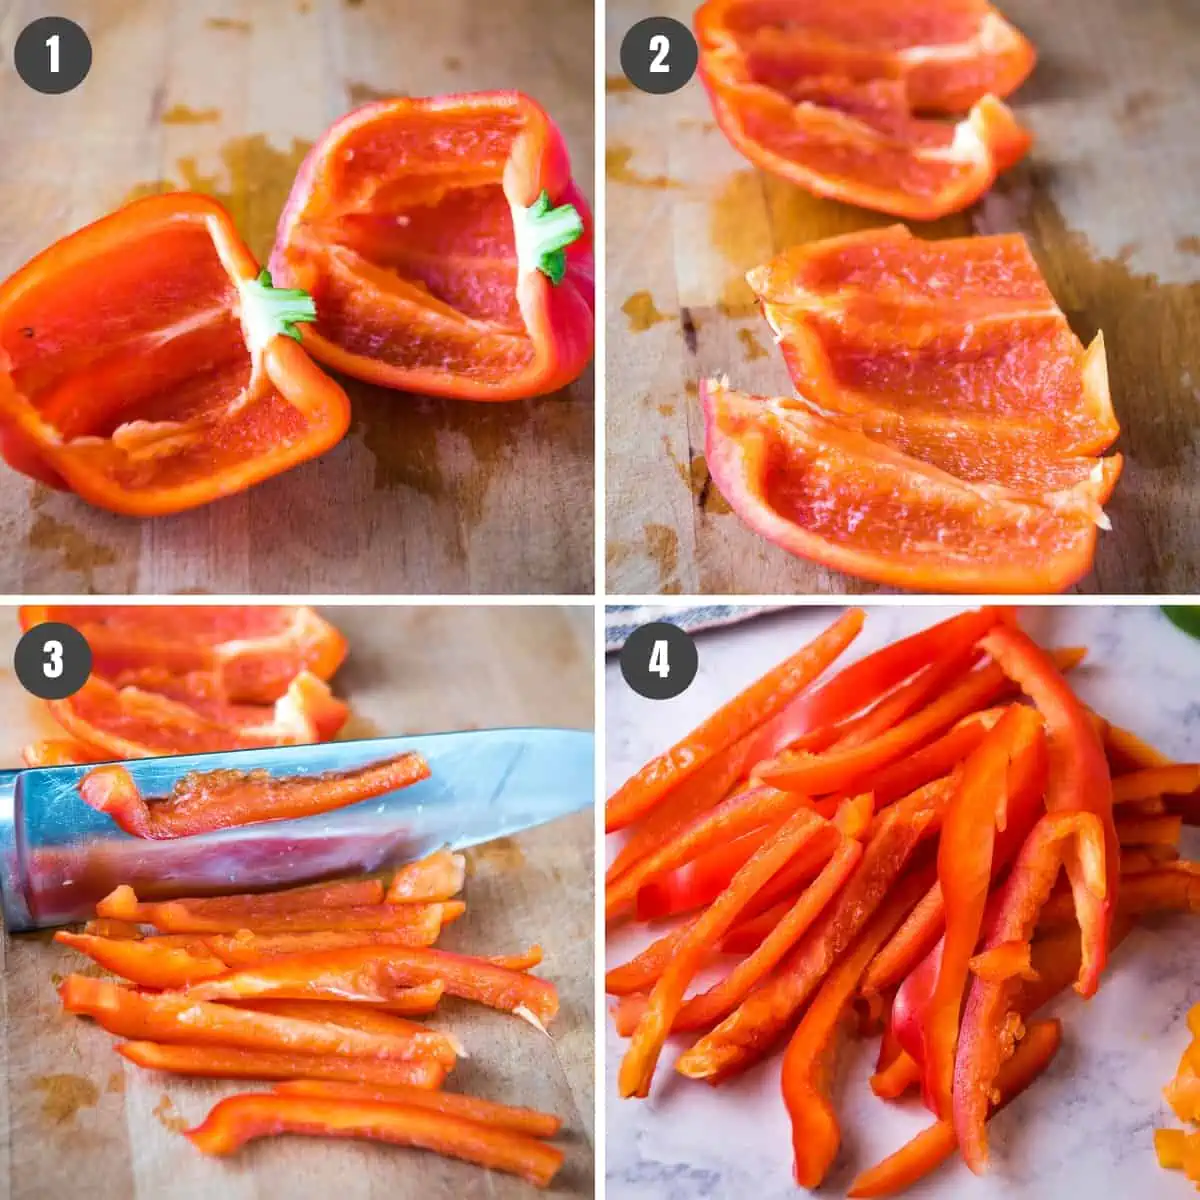 steps for how to slice or julienne red bell peppers into strips on butcher block cutting board